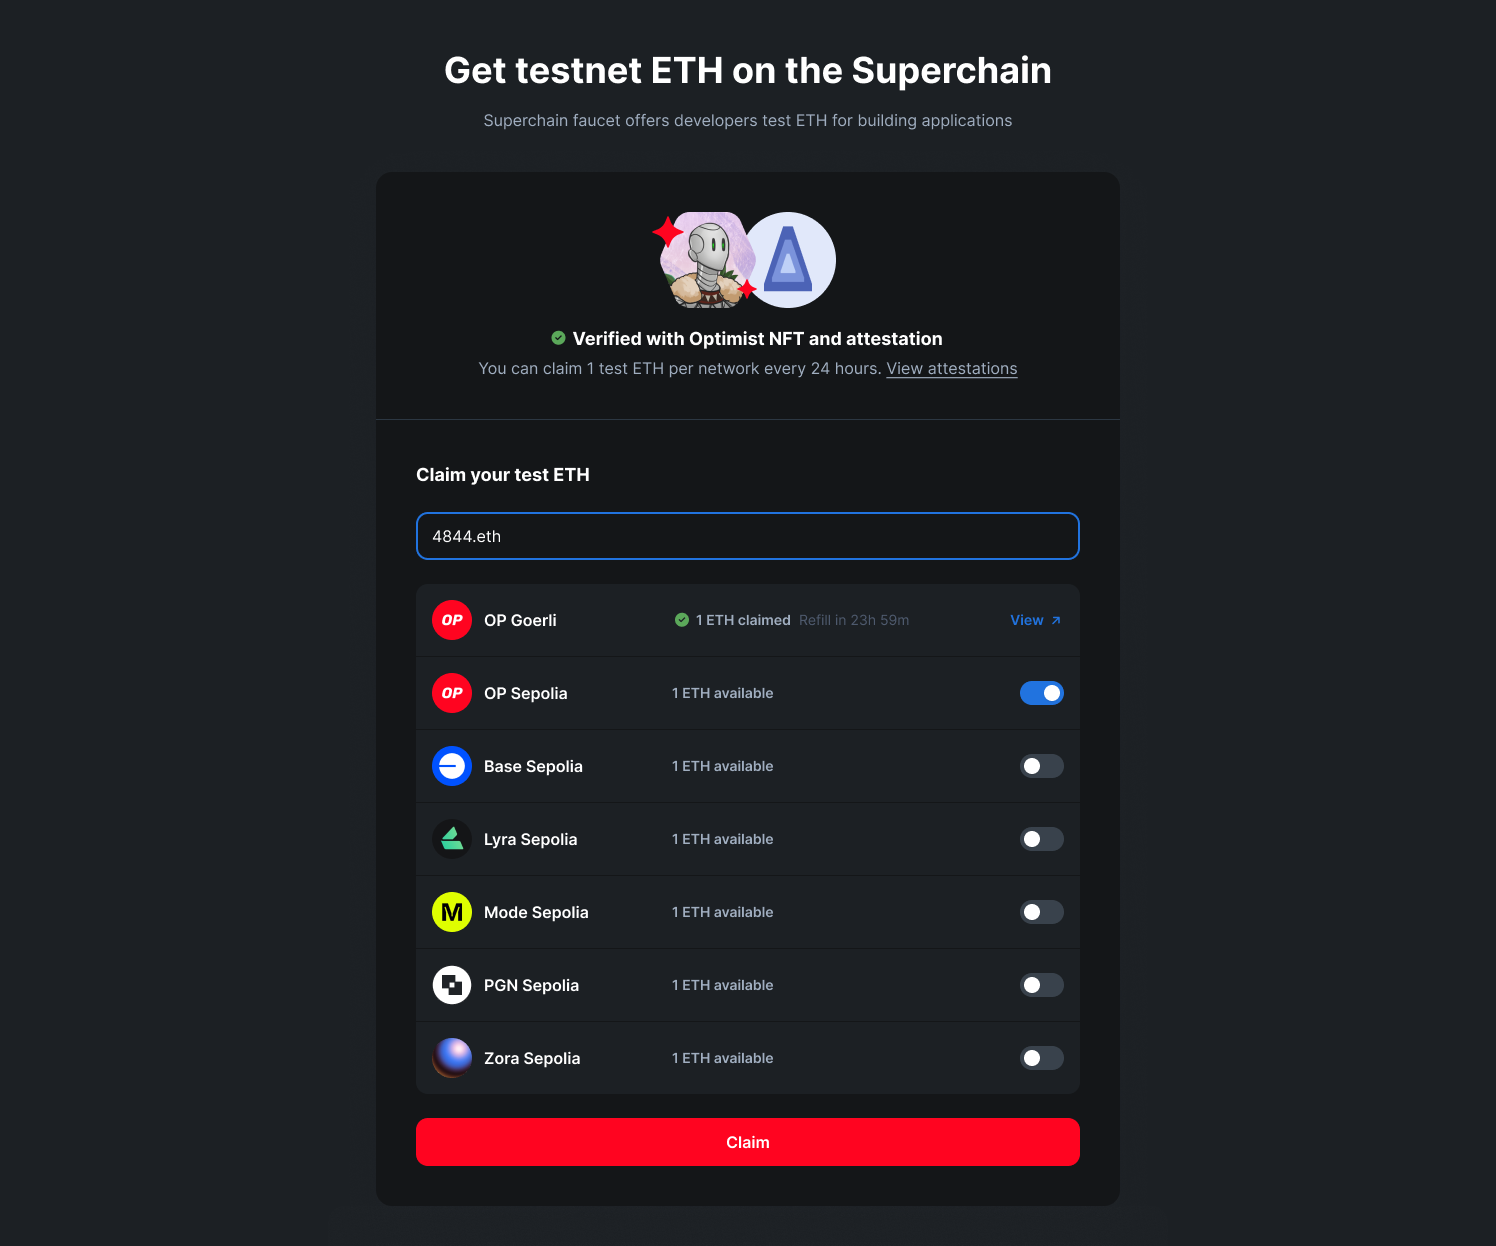 Providing Easier Access to Testnet ETH Across the Superchain with the Superchain Faucet